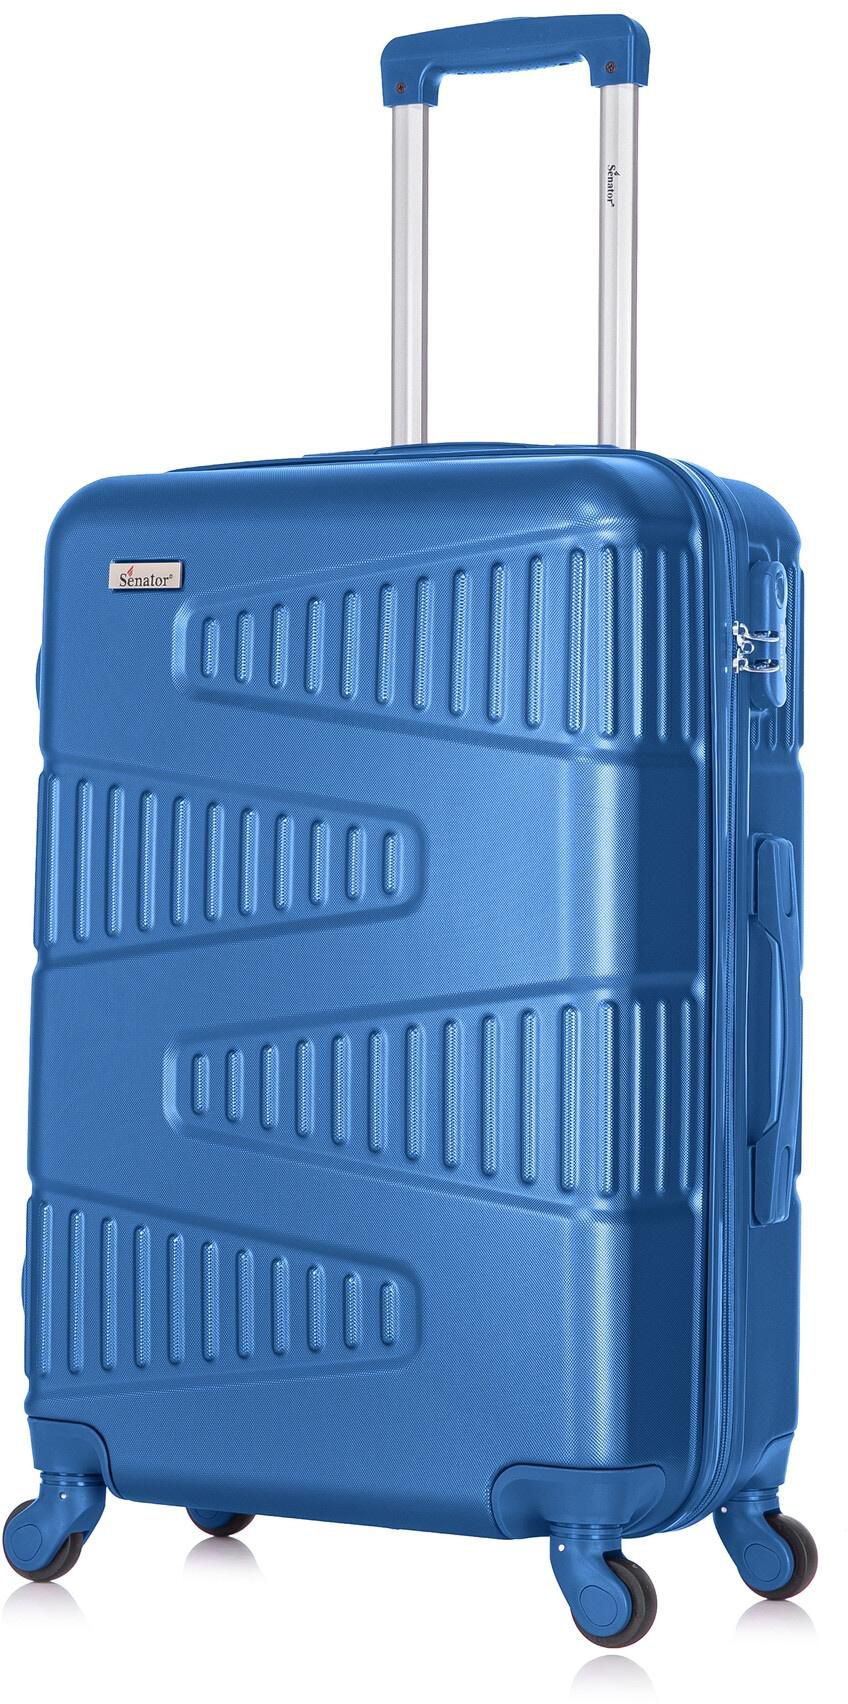 Senator Hard Case Medium Suitcase Luggage Trolley For Unisex ABS Lightweight Travel Bag with 4 Spinner Wheels KH1075 Pearl Blue